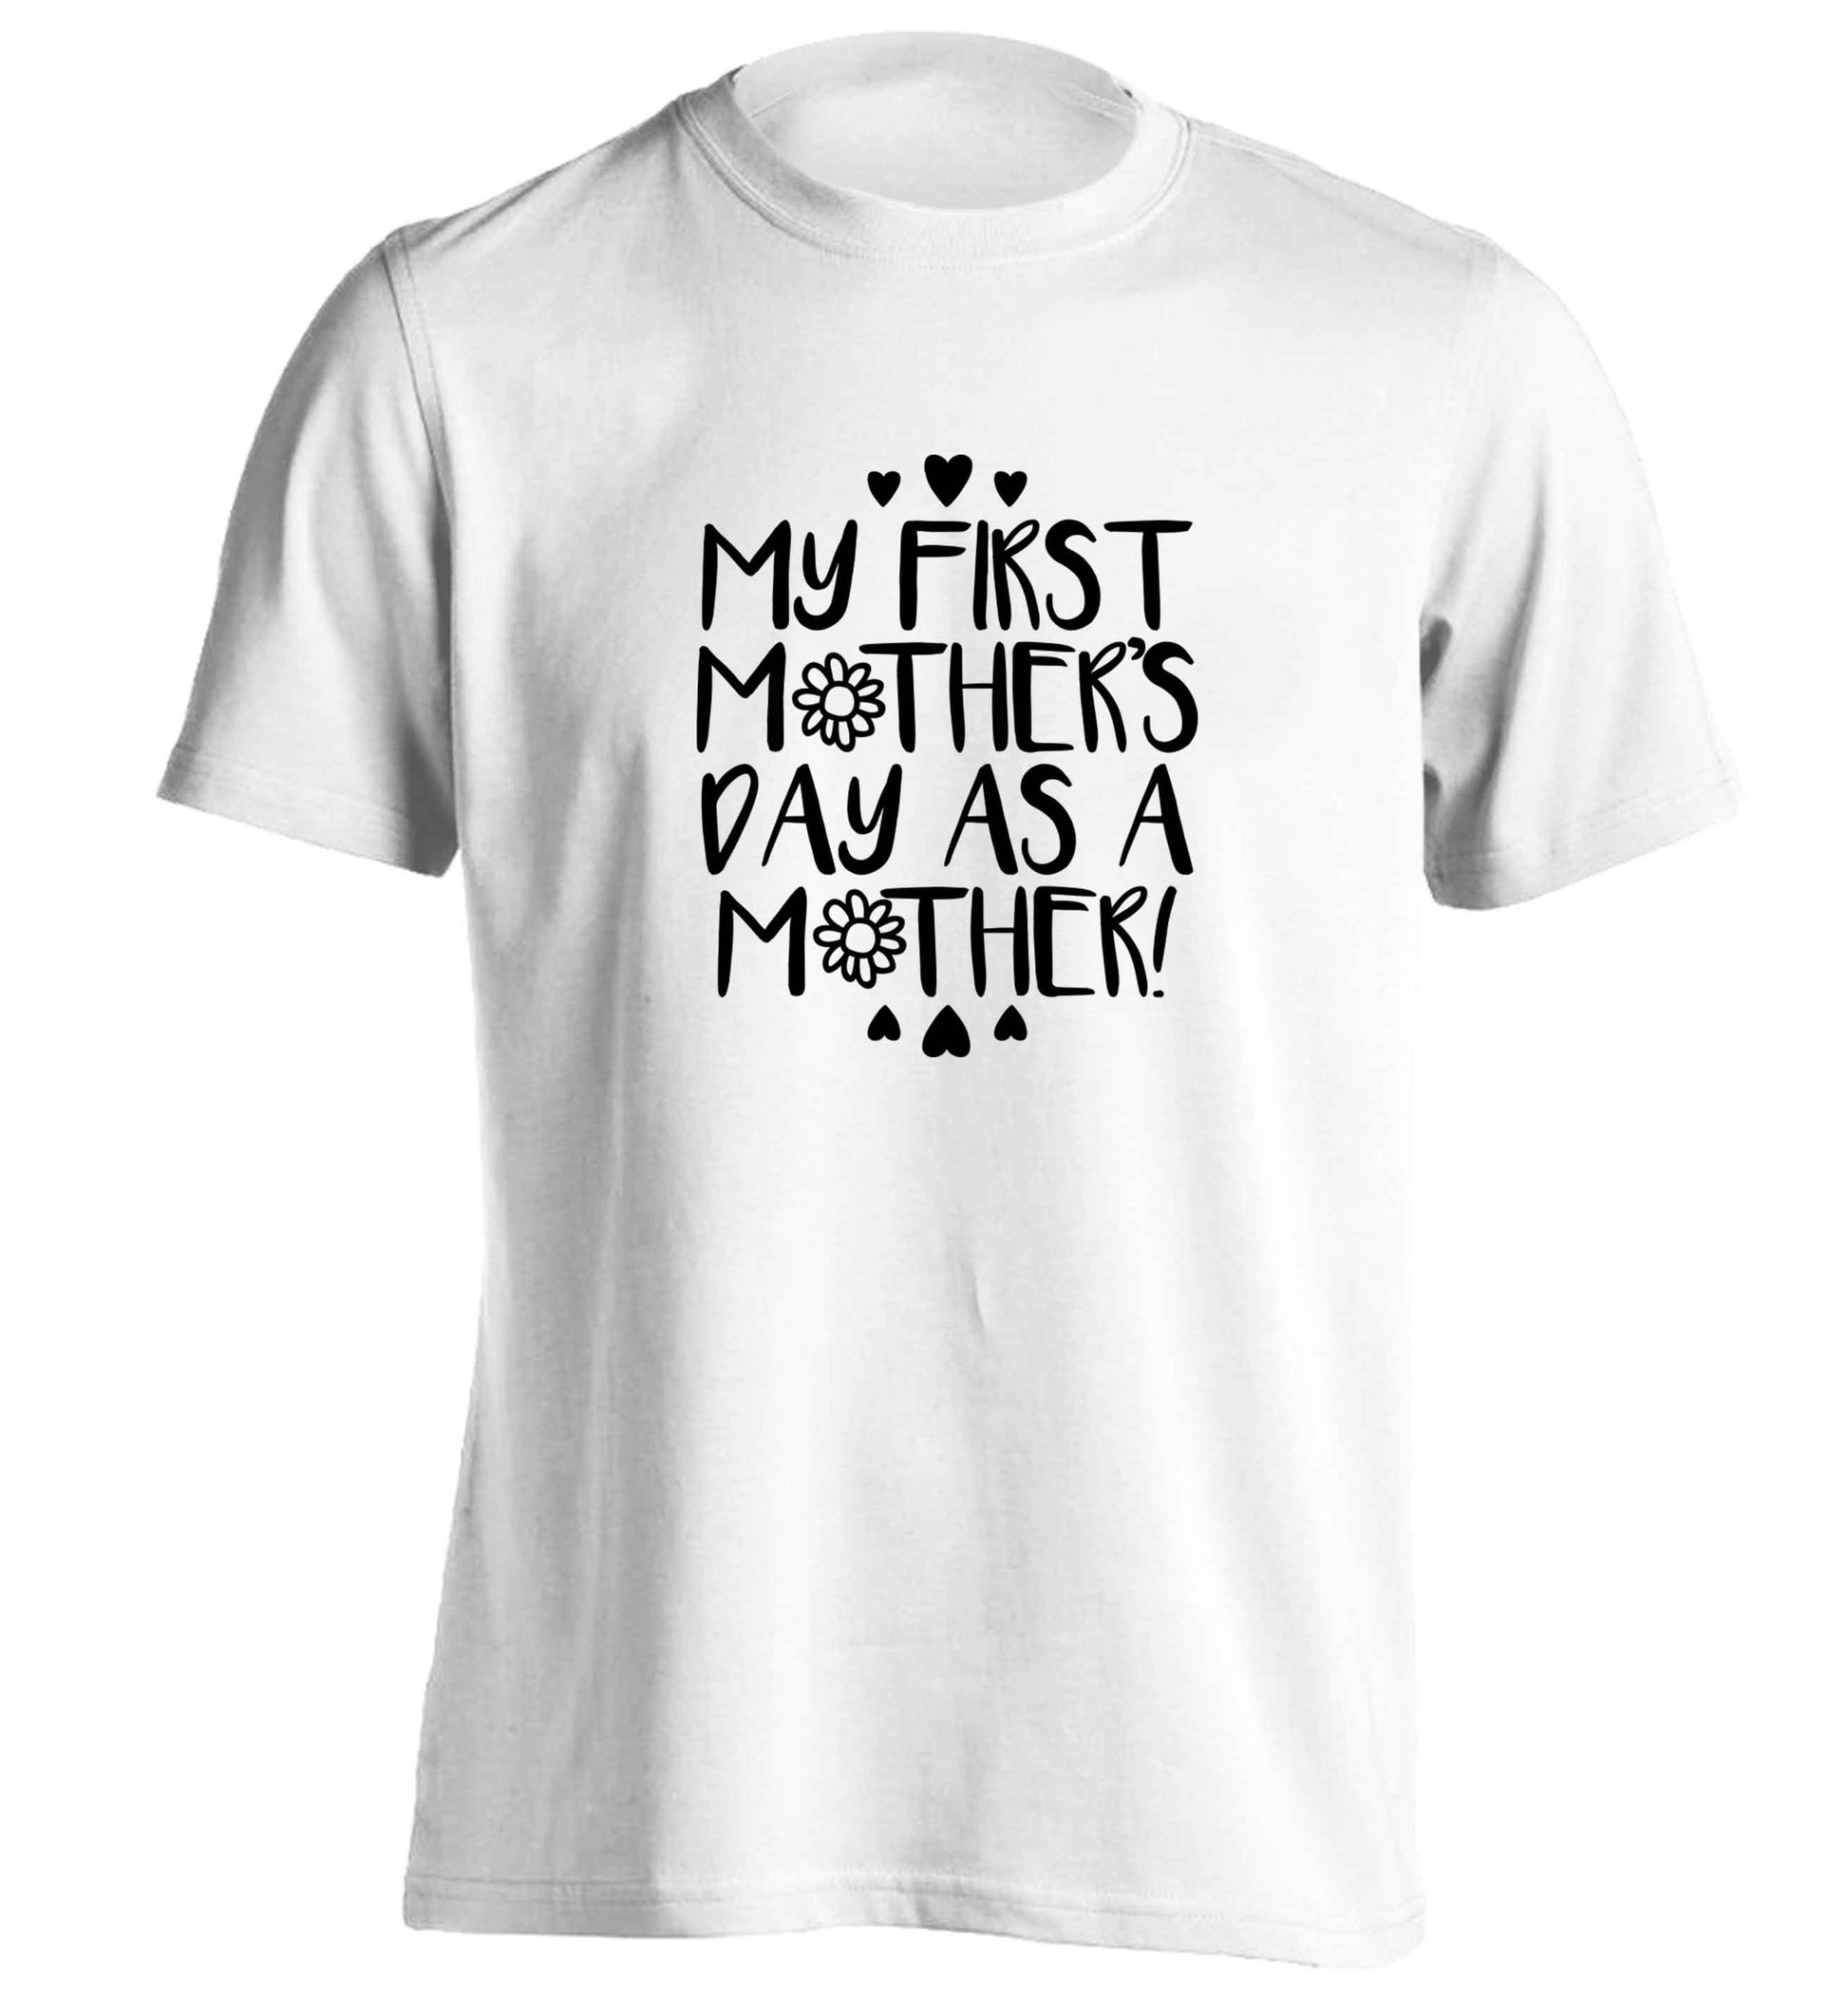 It's my first mother's day as a mother adults unisex white Tshirt 2XL